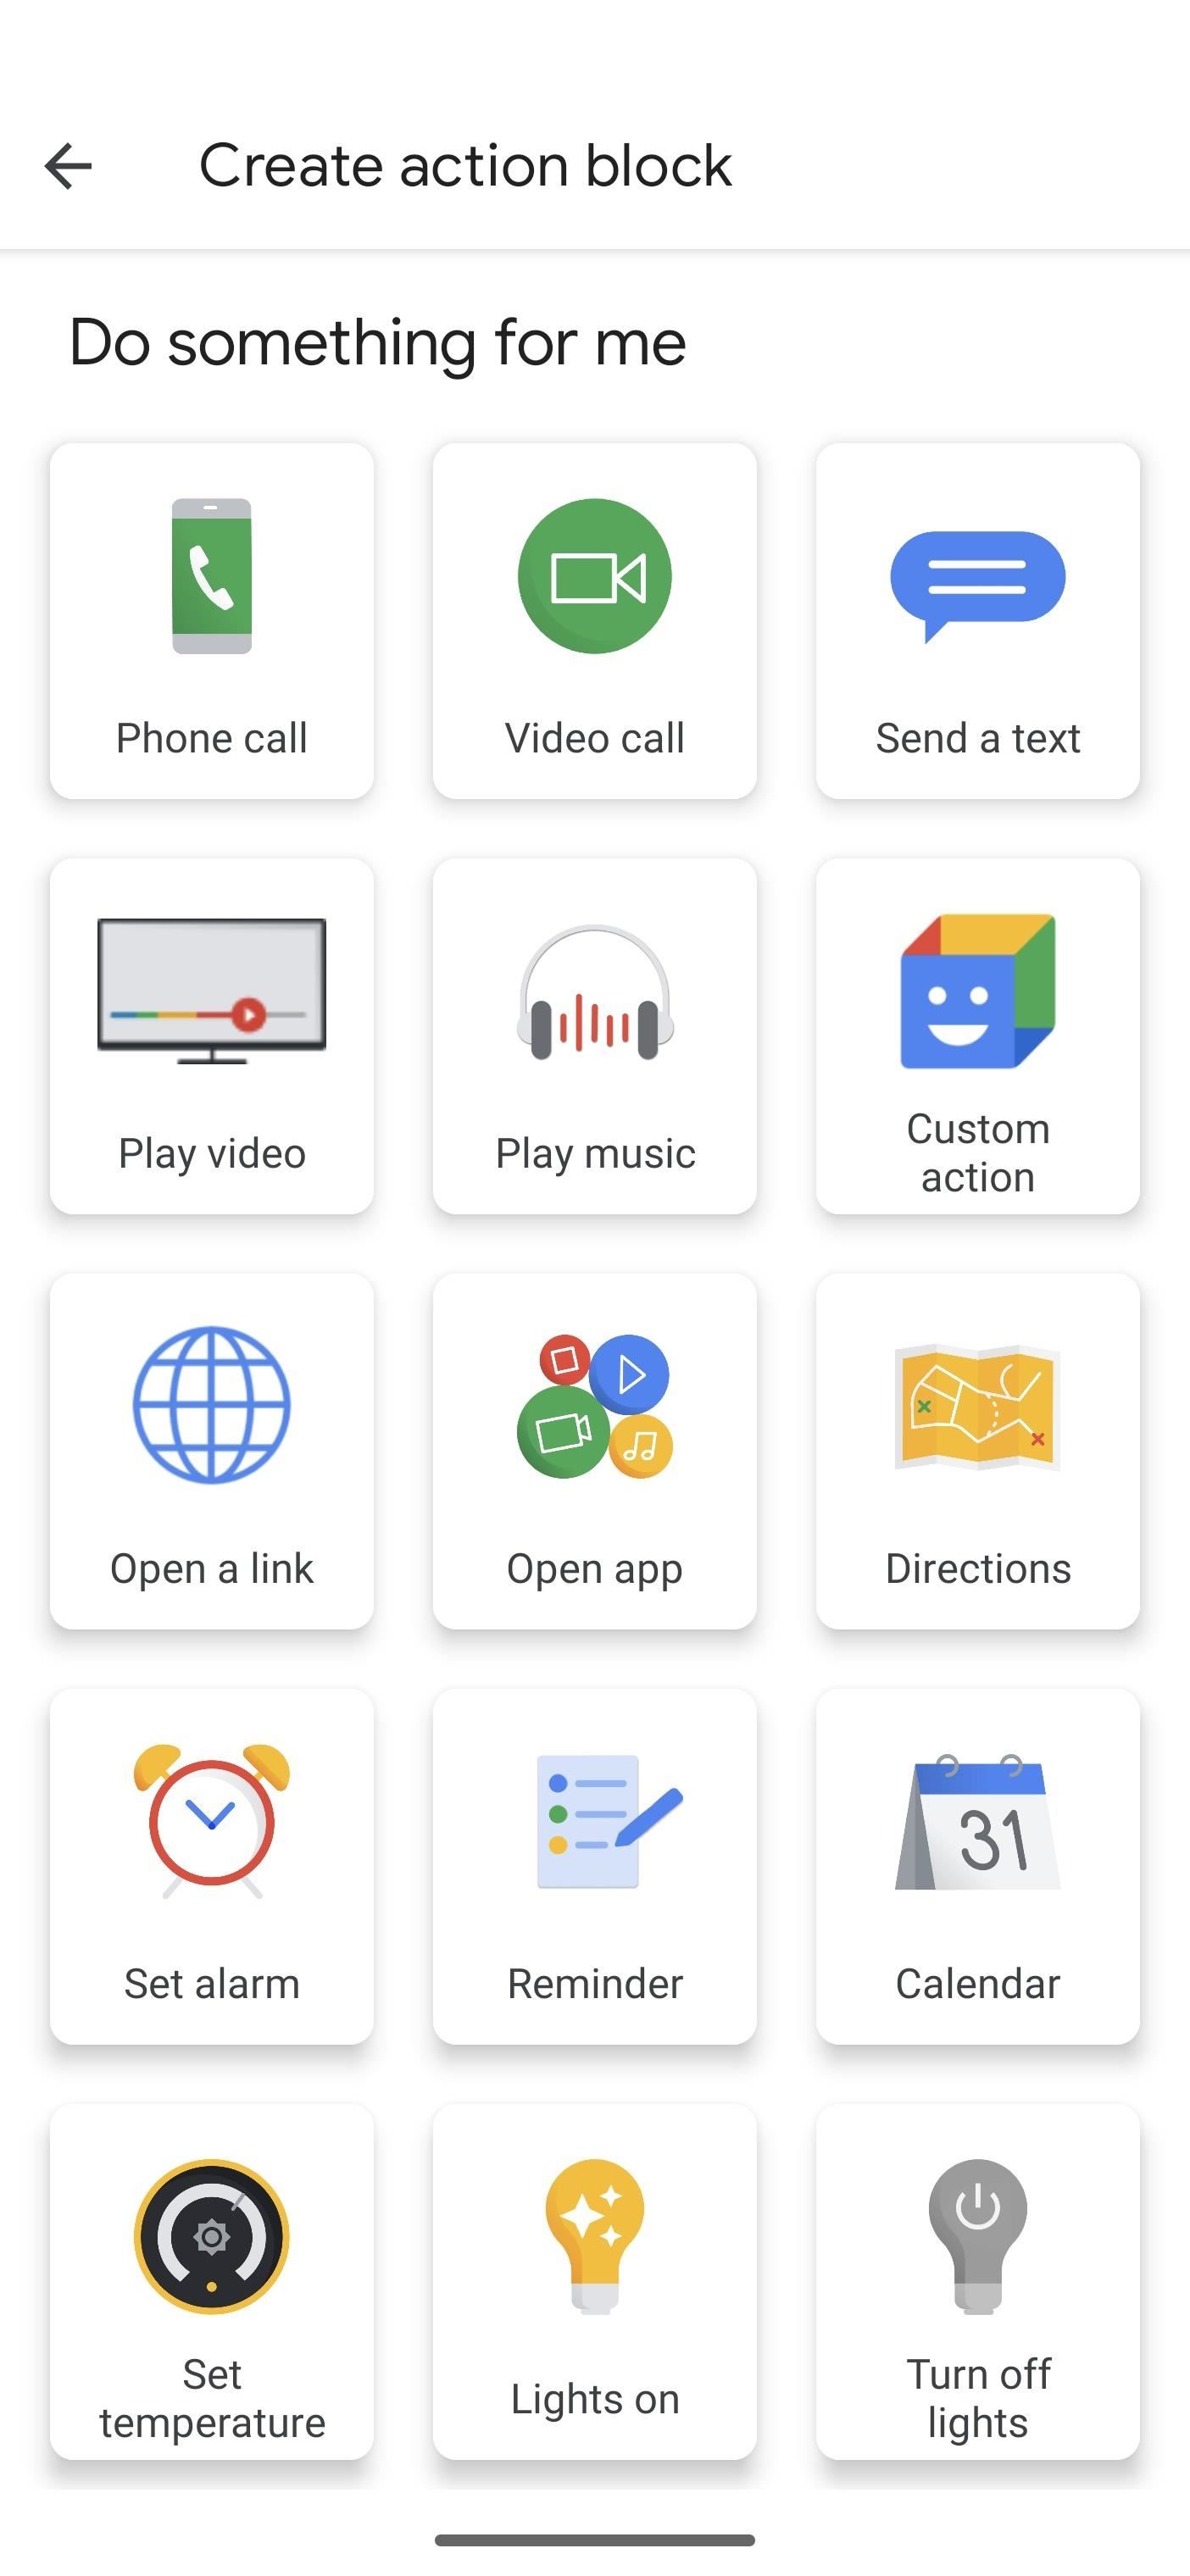 Create Home Screen Shortcuts to Almost Anything on Android — Videos, Music Playlists, Social Profiles, and More